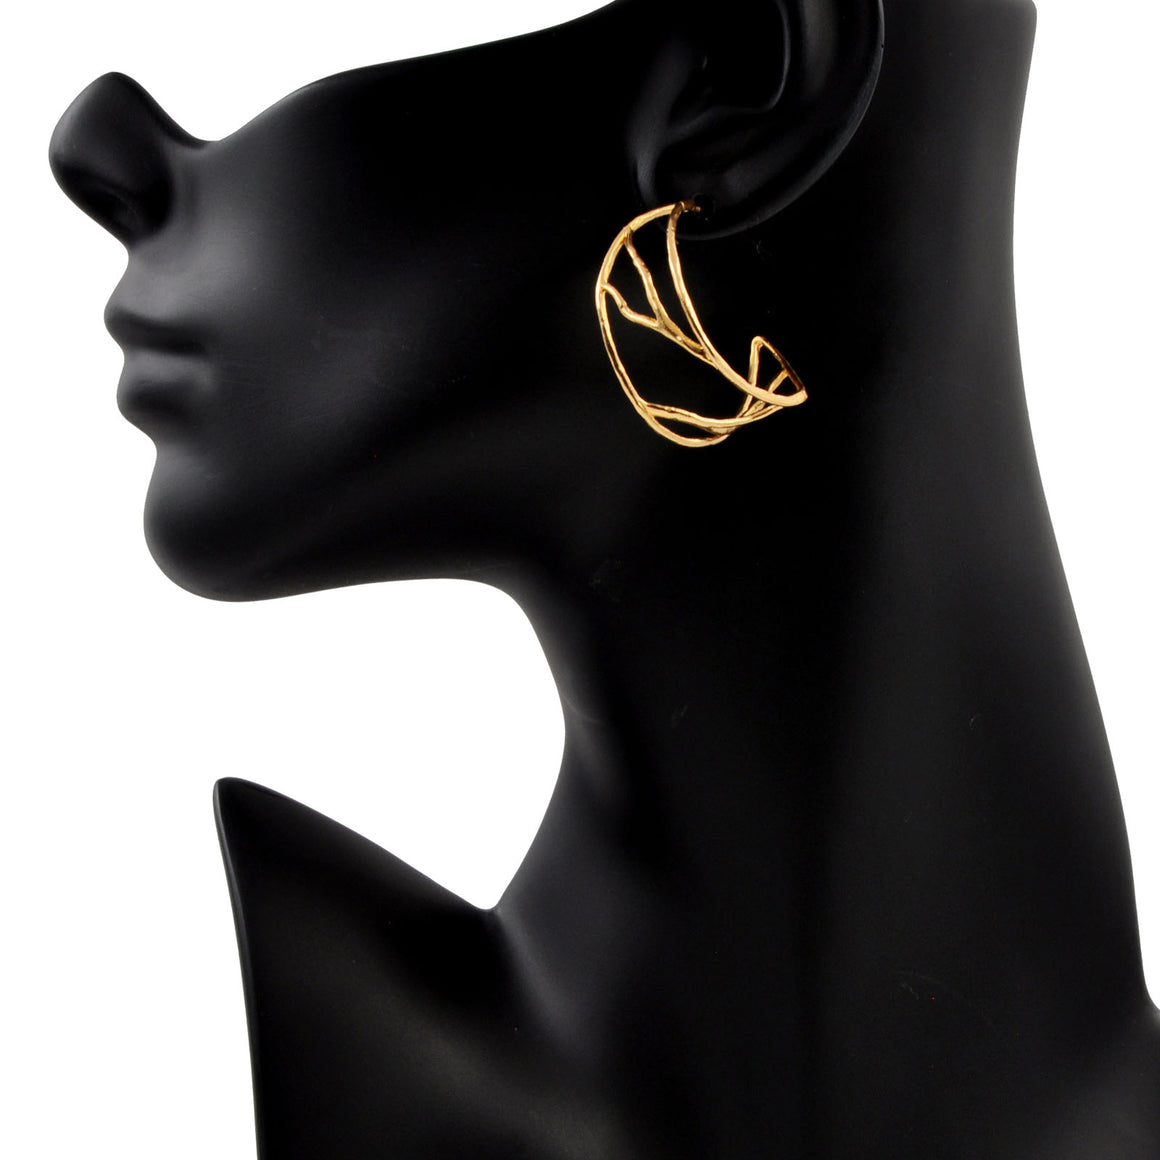 Intricate Branches Hoop Earrings - 24K Gold Plated